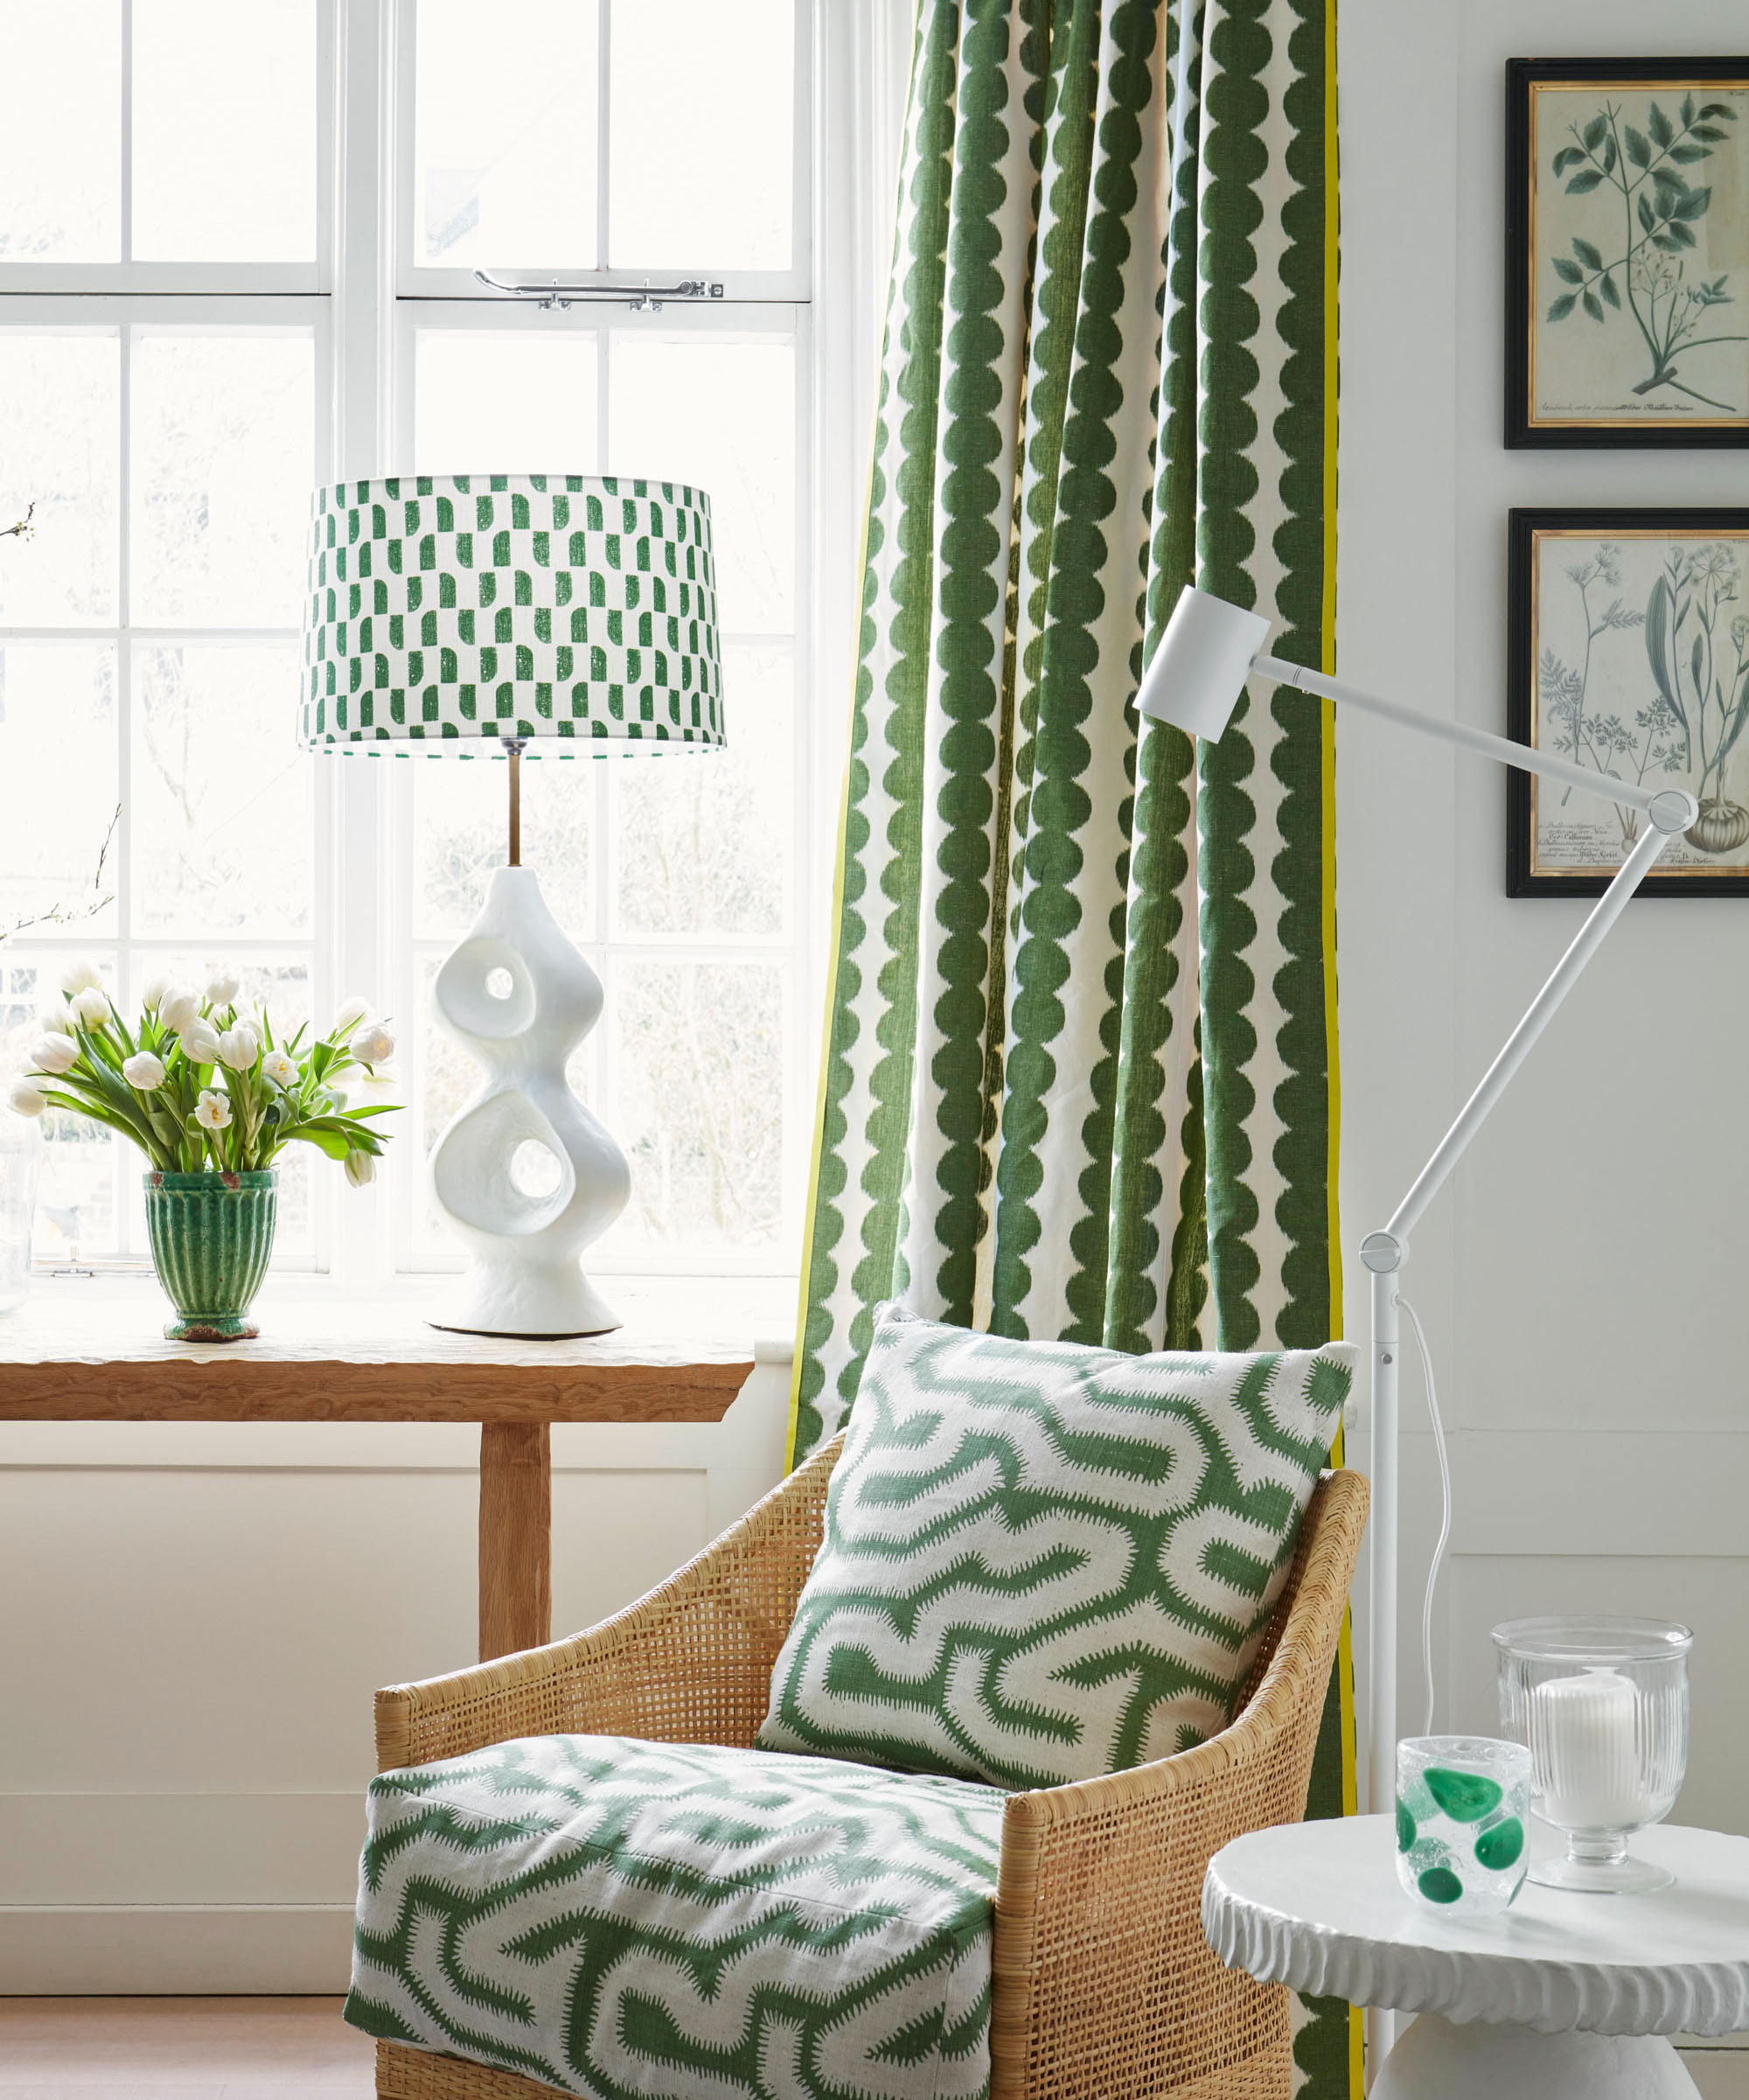 wooden console in living room window bay with green and white fabric designs and botanical artworks